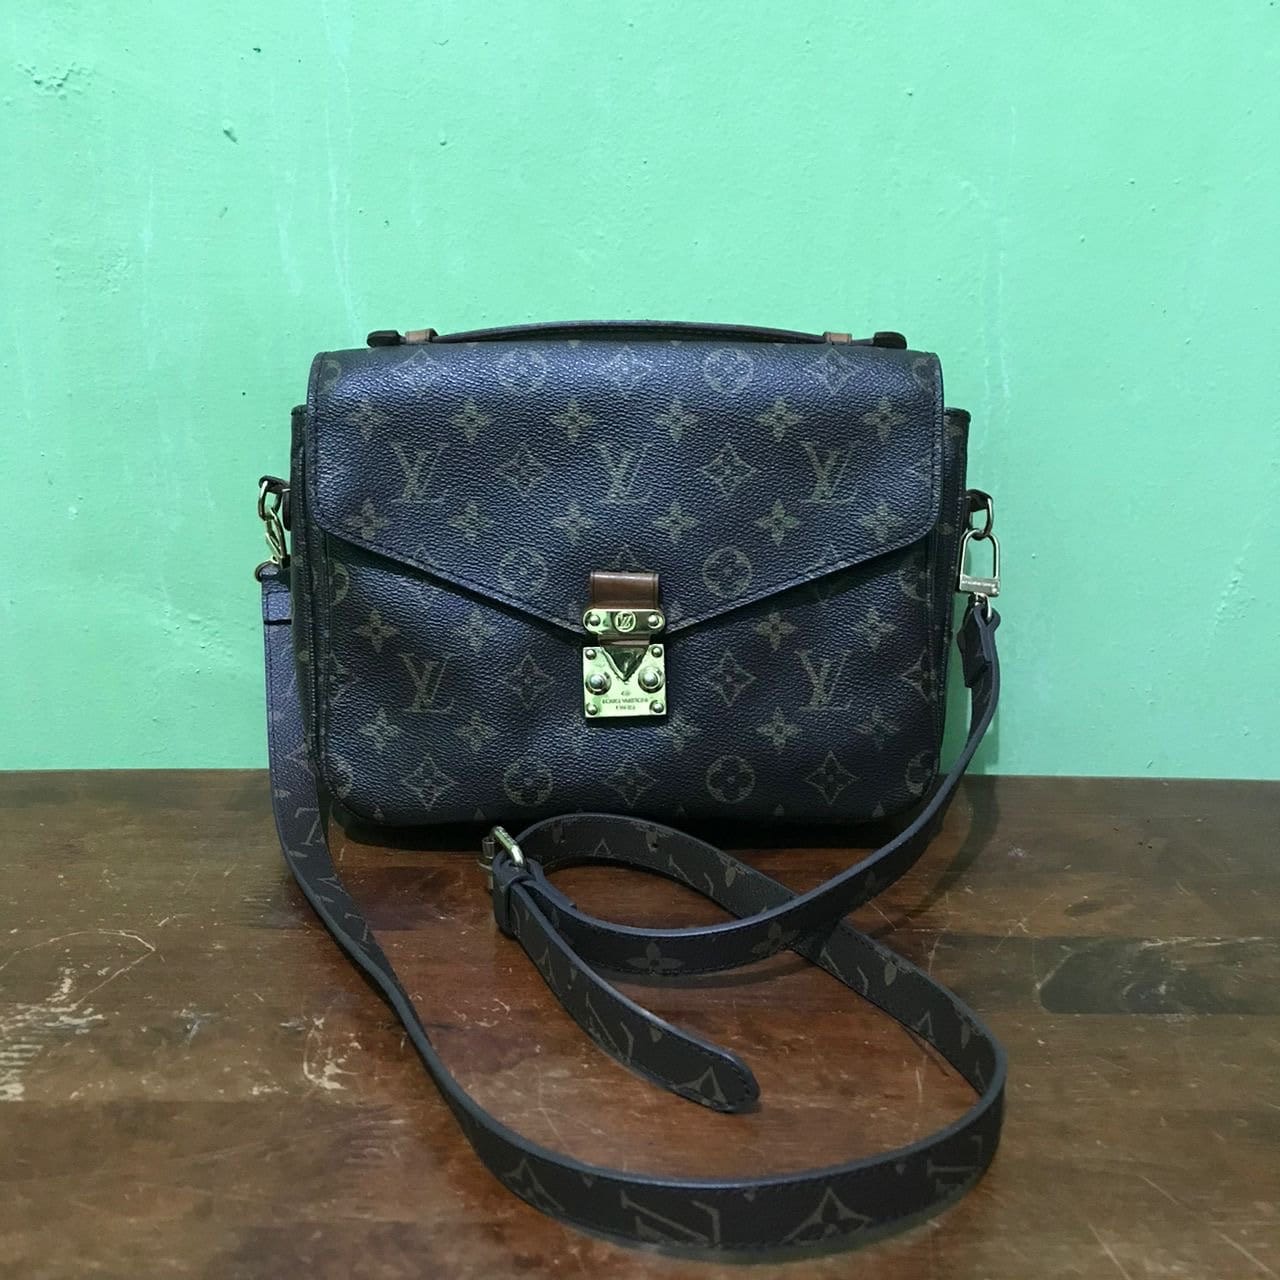 LV metis sling bag💞💞 - Multi Brand Bags And Accessories